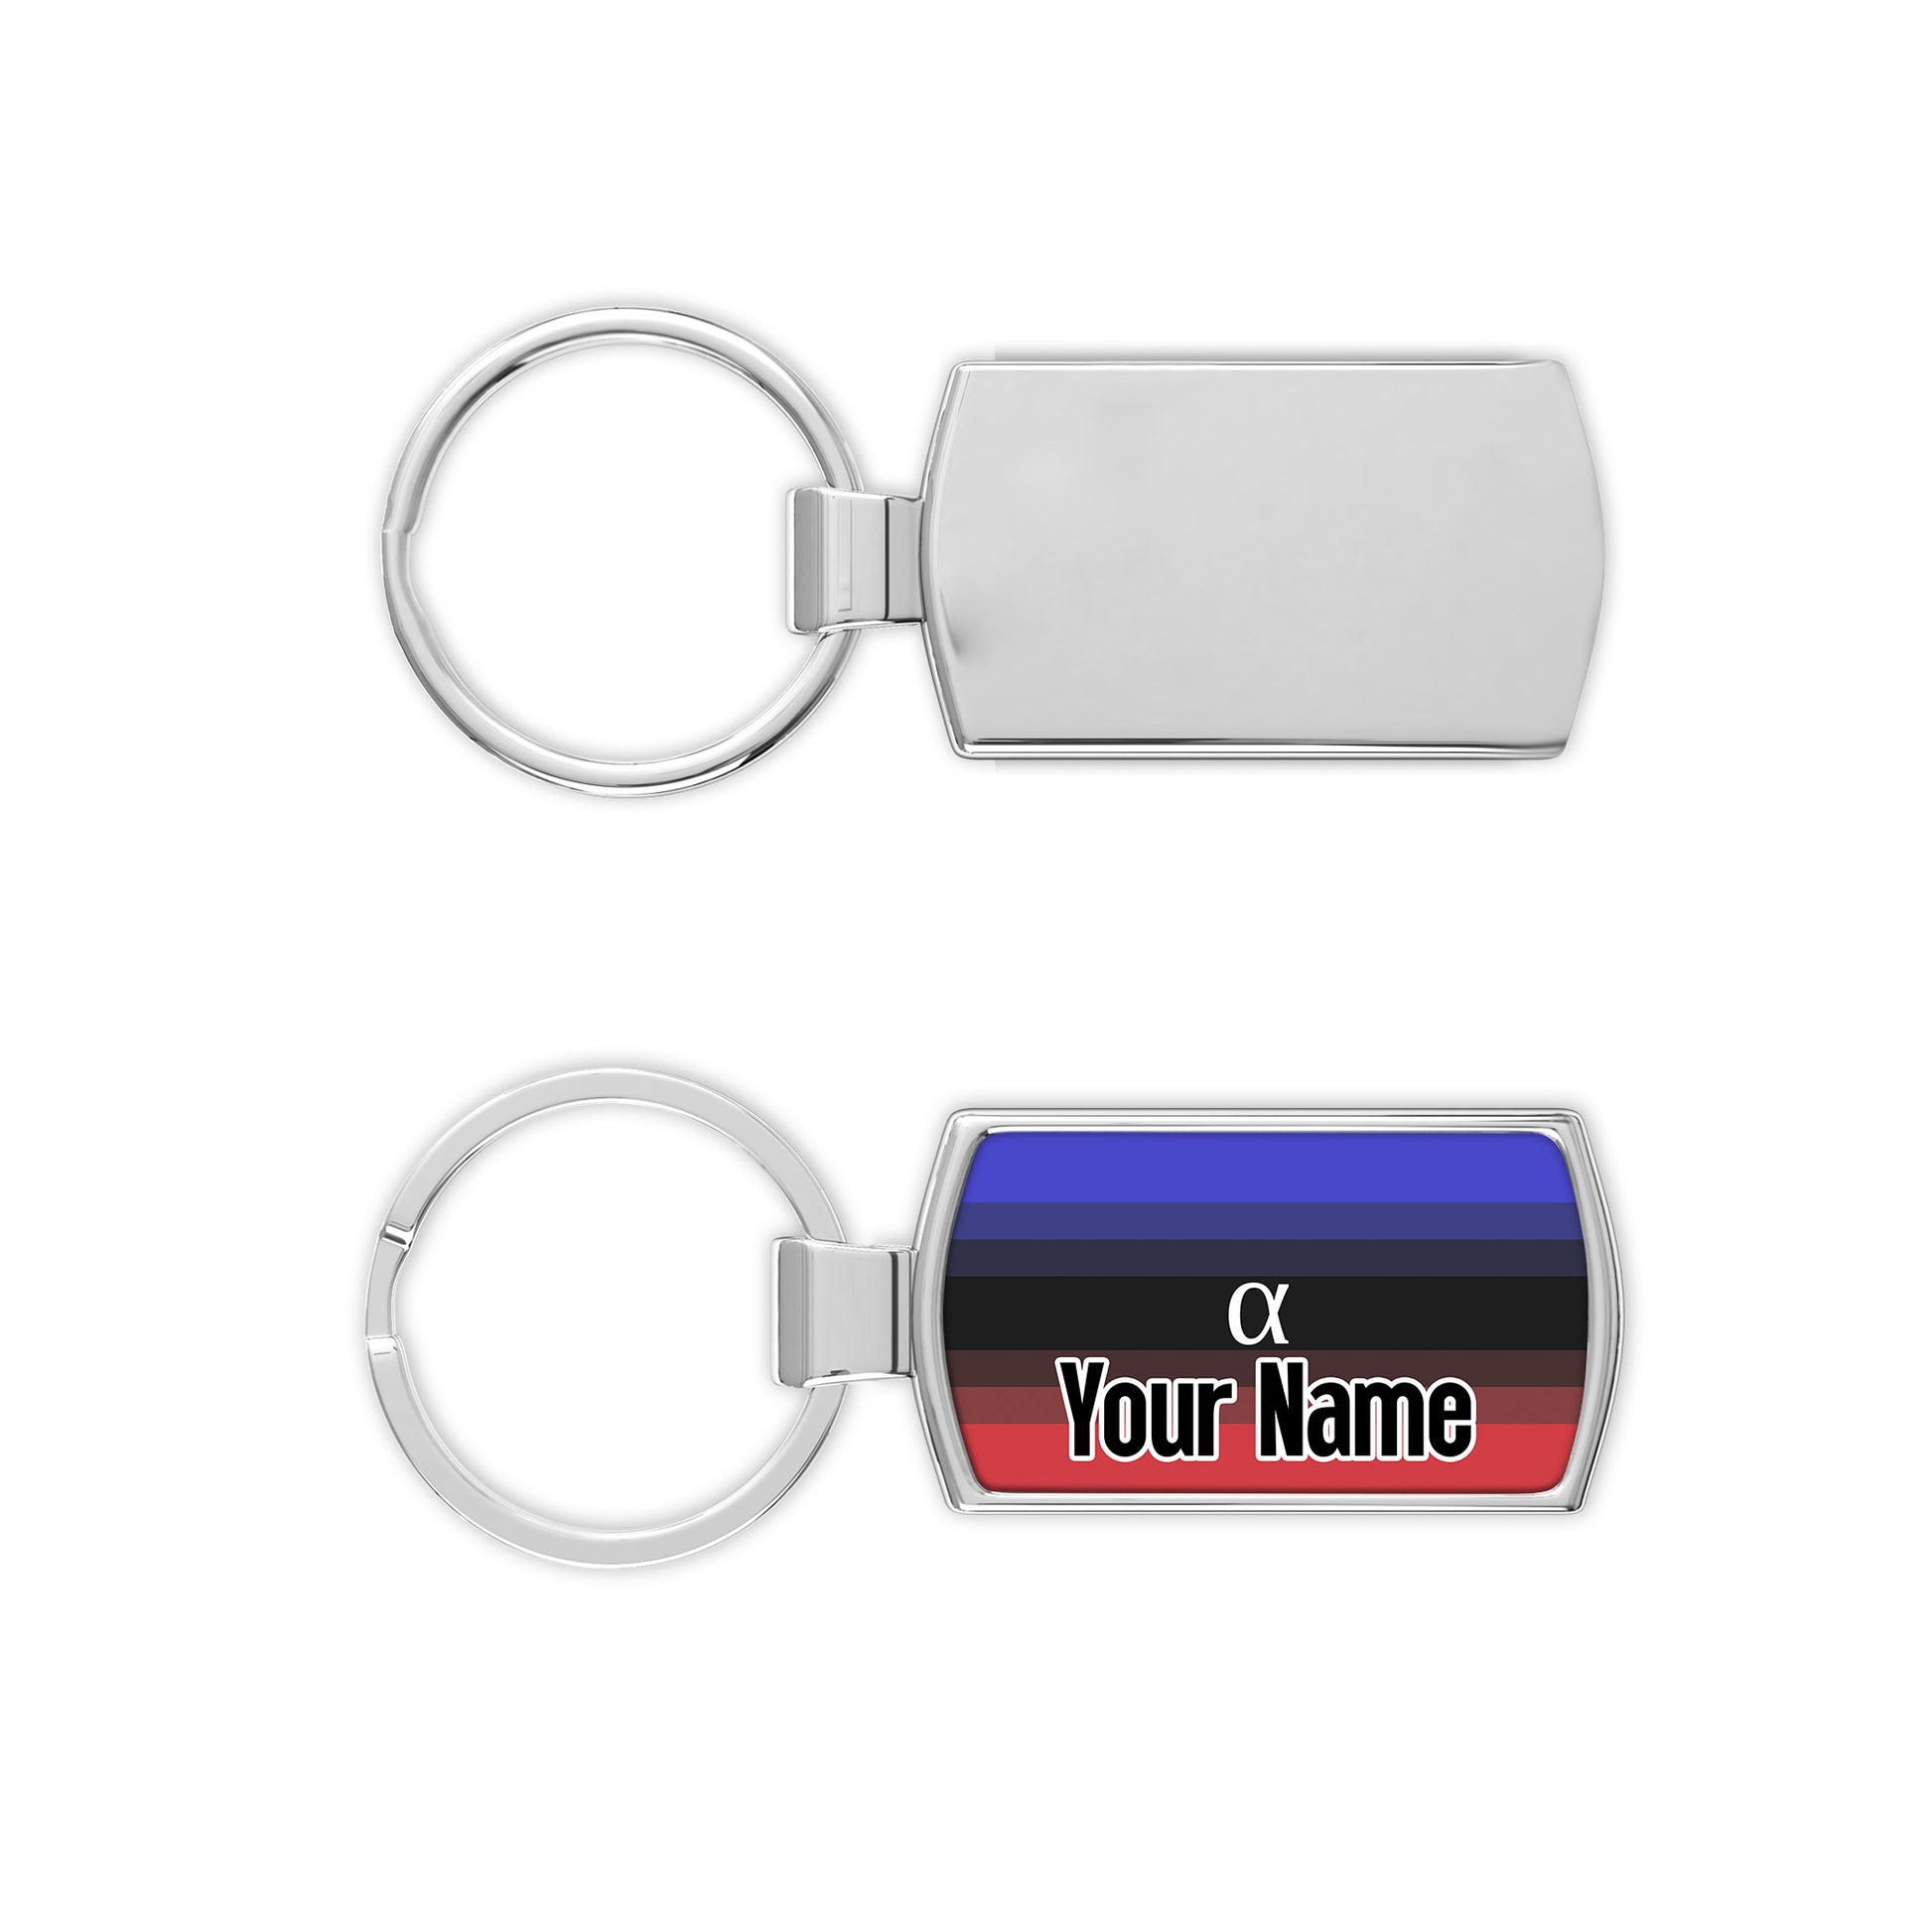 Ambiamorous pride flag metal keyring that comes personalised with your name printed on it